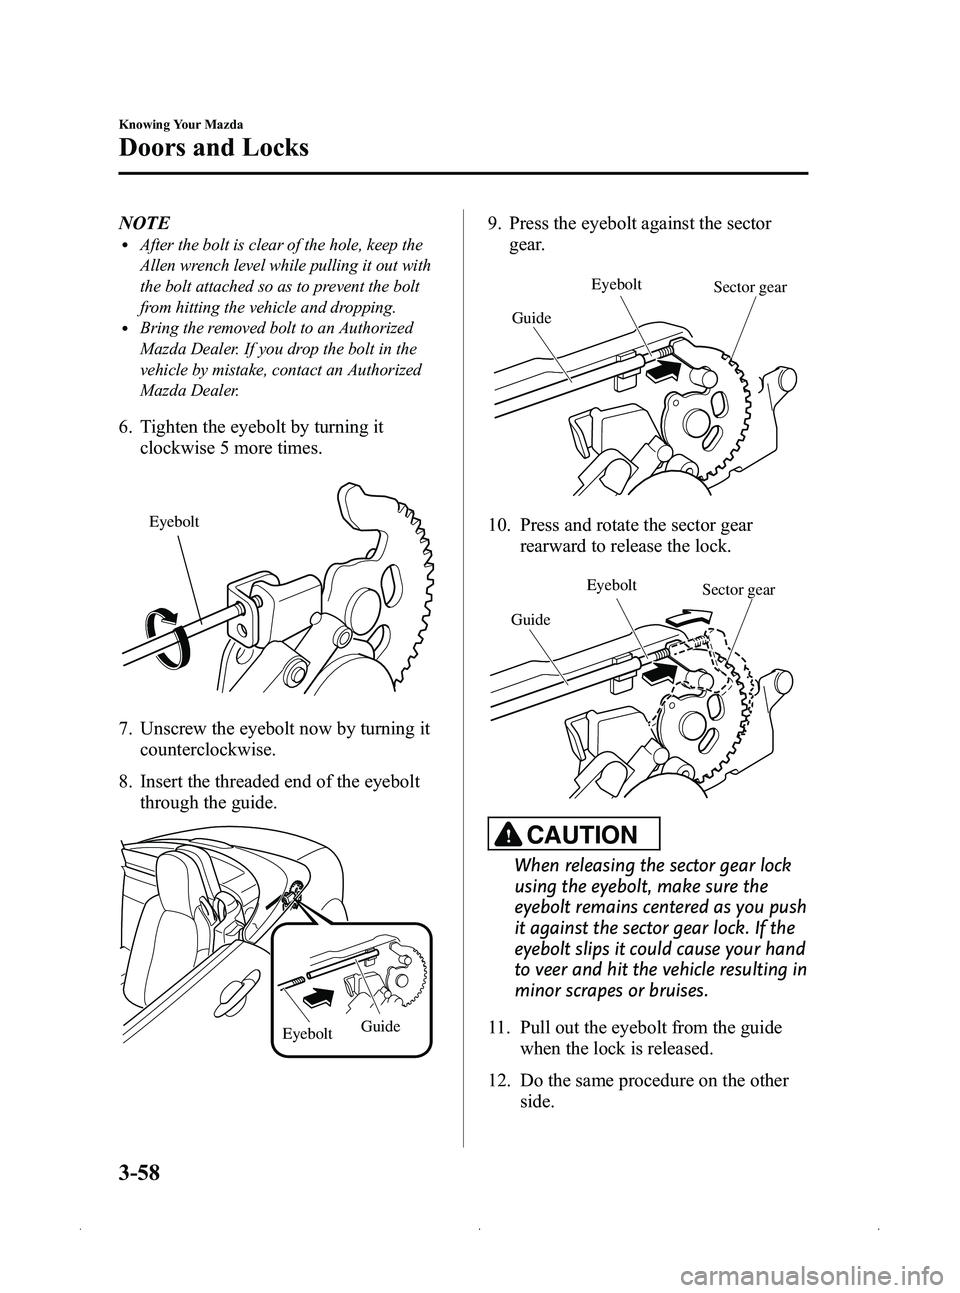 MAZDA MODEL MX-5 MIATA 2012  Owners Manual Black plate (122,1)
NOTElAfter the bolt is clear of the hole, keep the
Allen wrench level while pulling it out with
the bolt attached so as to prevent the bolt
from hitting the vehicle and dropping.
l